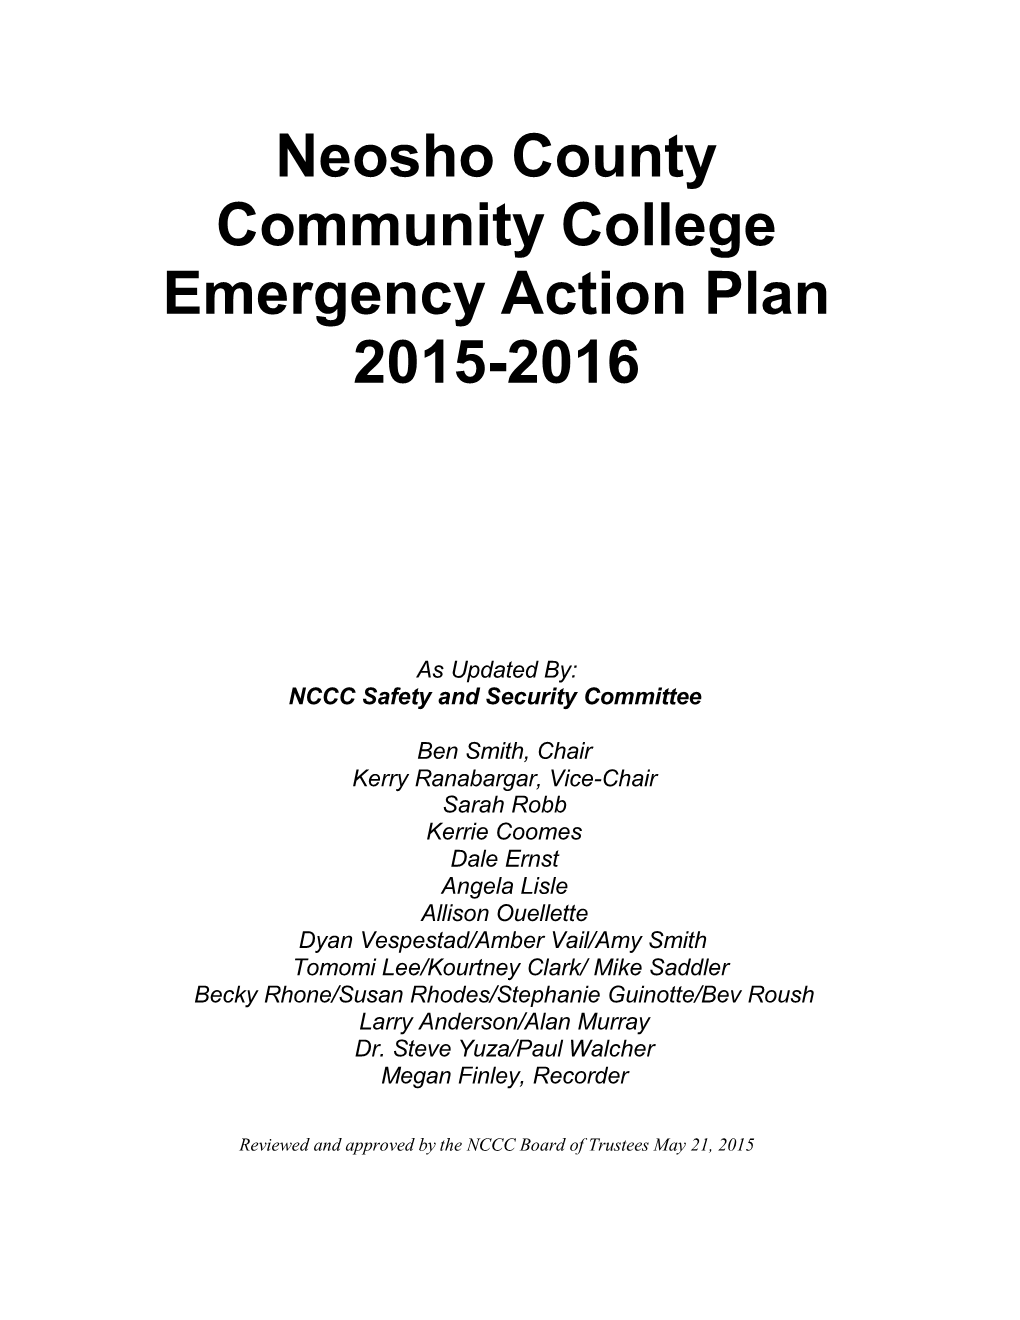 Neosho County Community College Emergency Action Plan 2015-2016